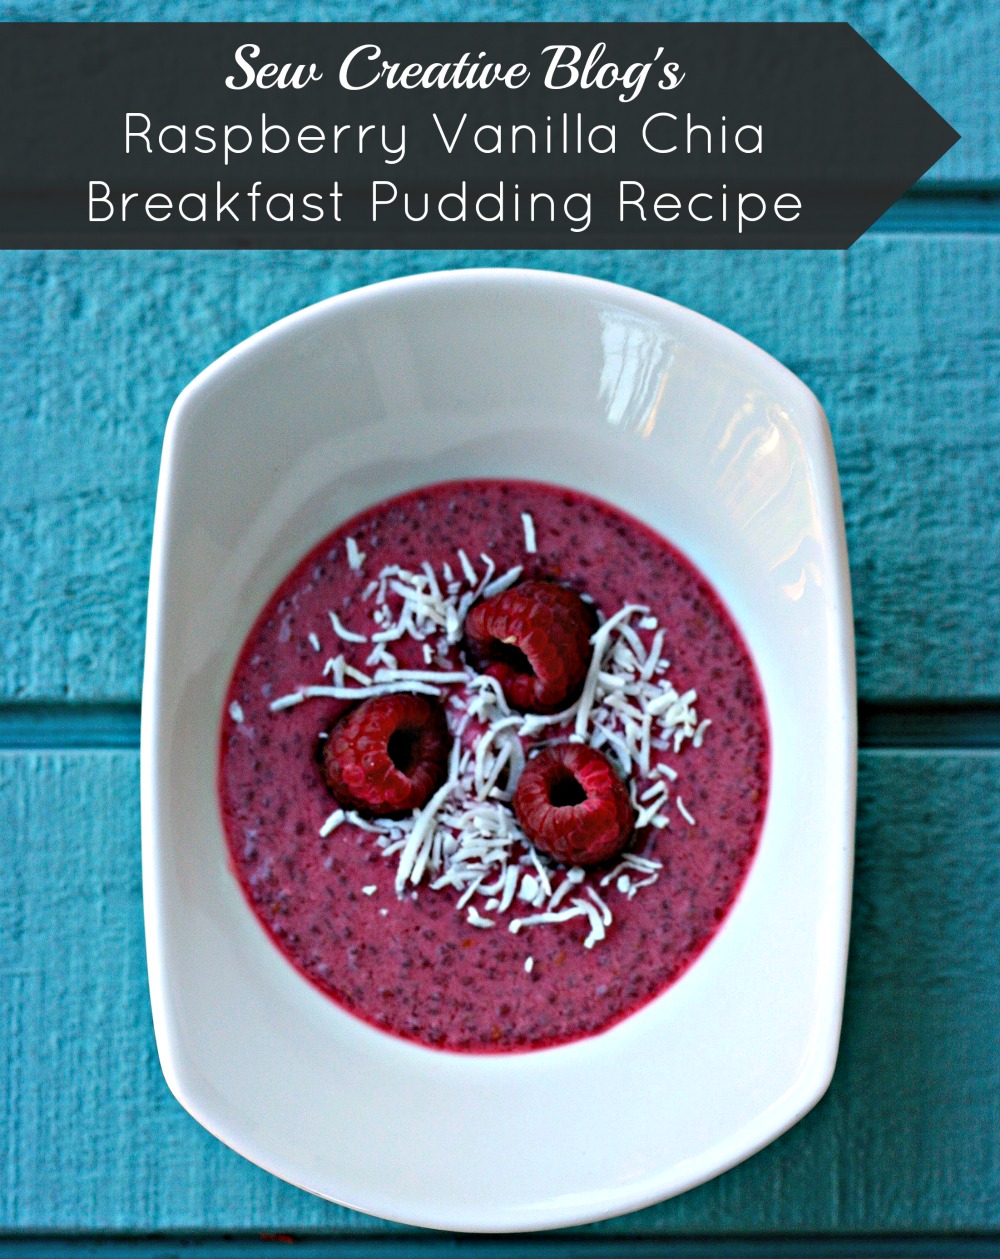 Delicious, nutritious and super easy Raspberry Vanilla Chia Breakfast Pudding Recipe from Sew Creative Blog a great paleo clean eating breakfast